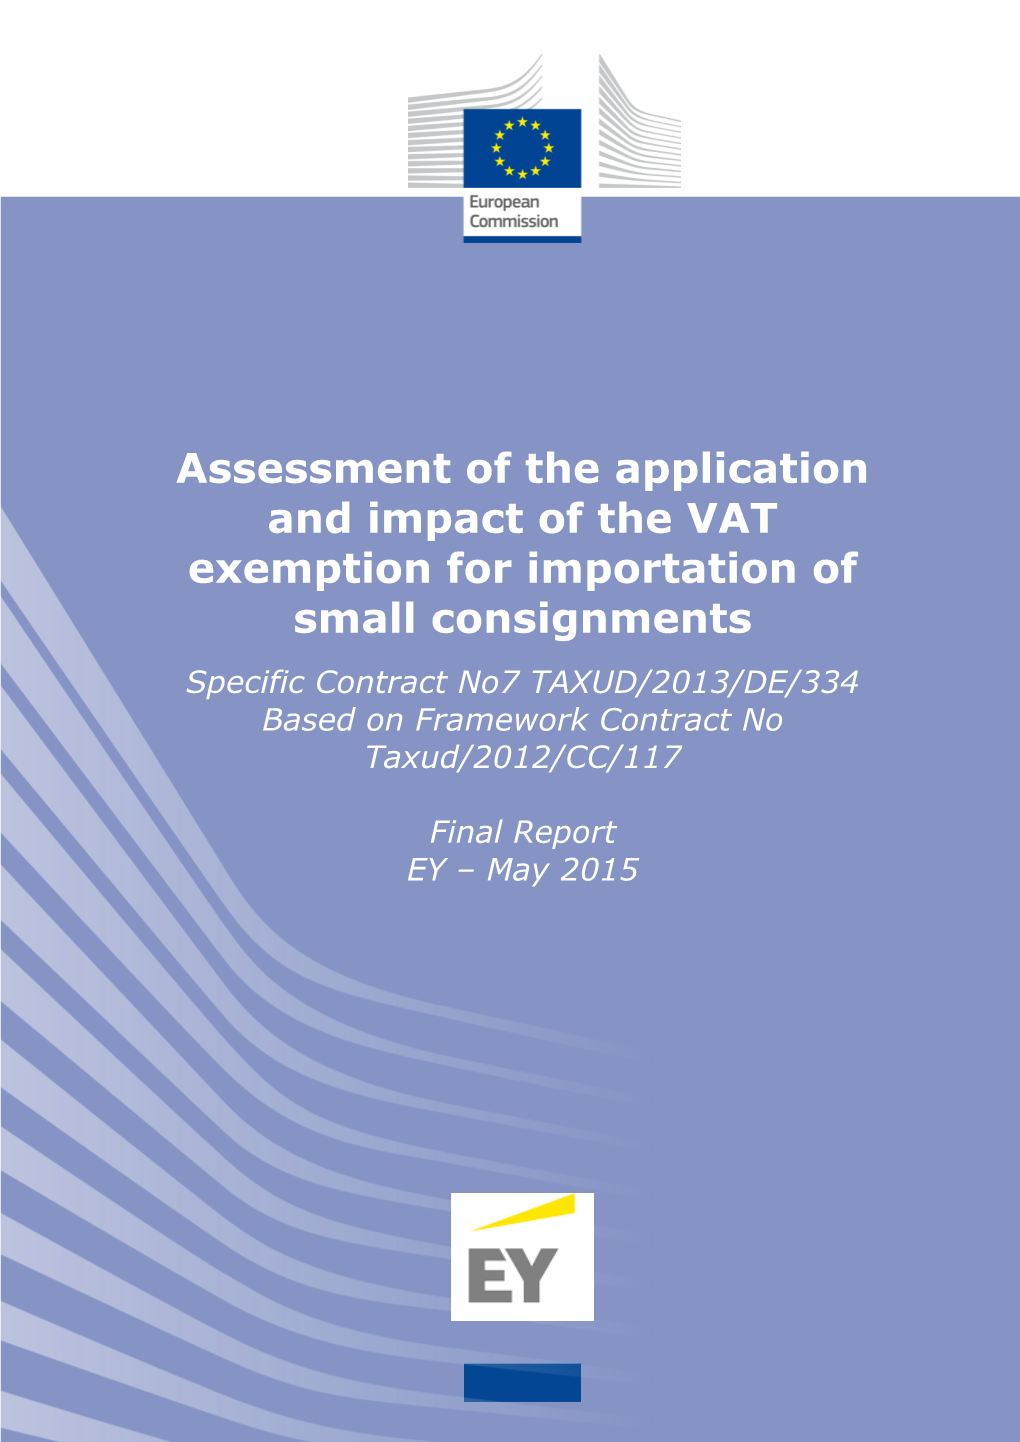 Assessment of the Application and Impact of the VAT Exemption for Importation of Small Consignments